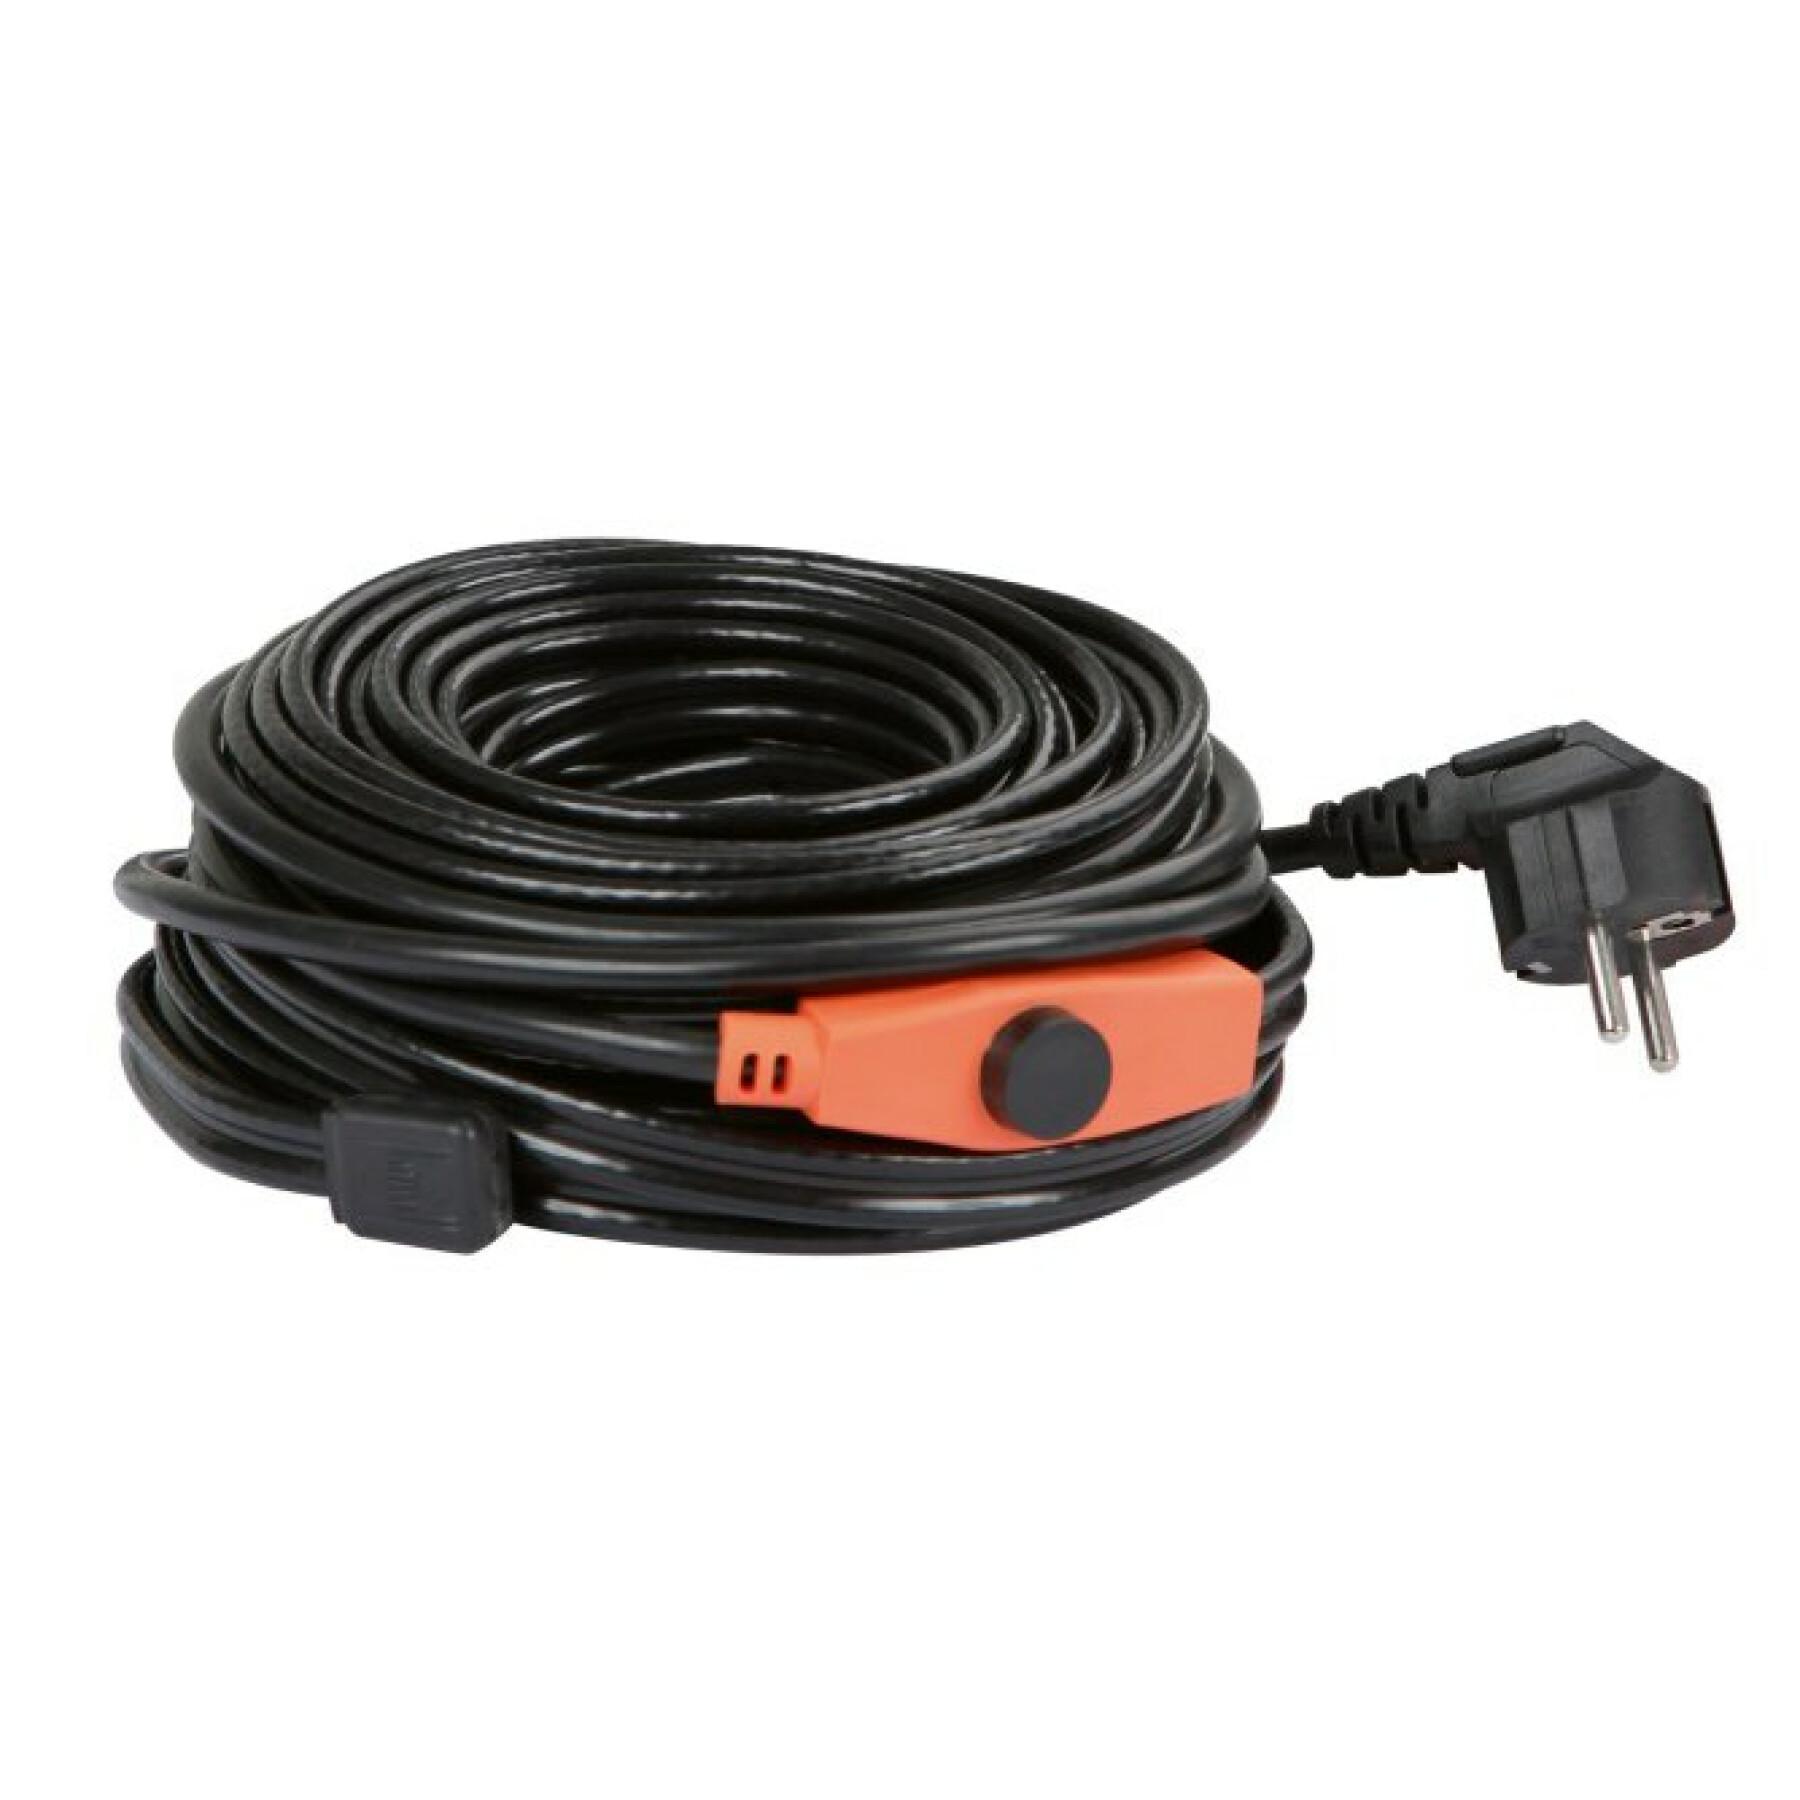 Heating cable Kerbl 230V 1m,16W